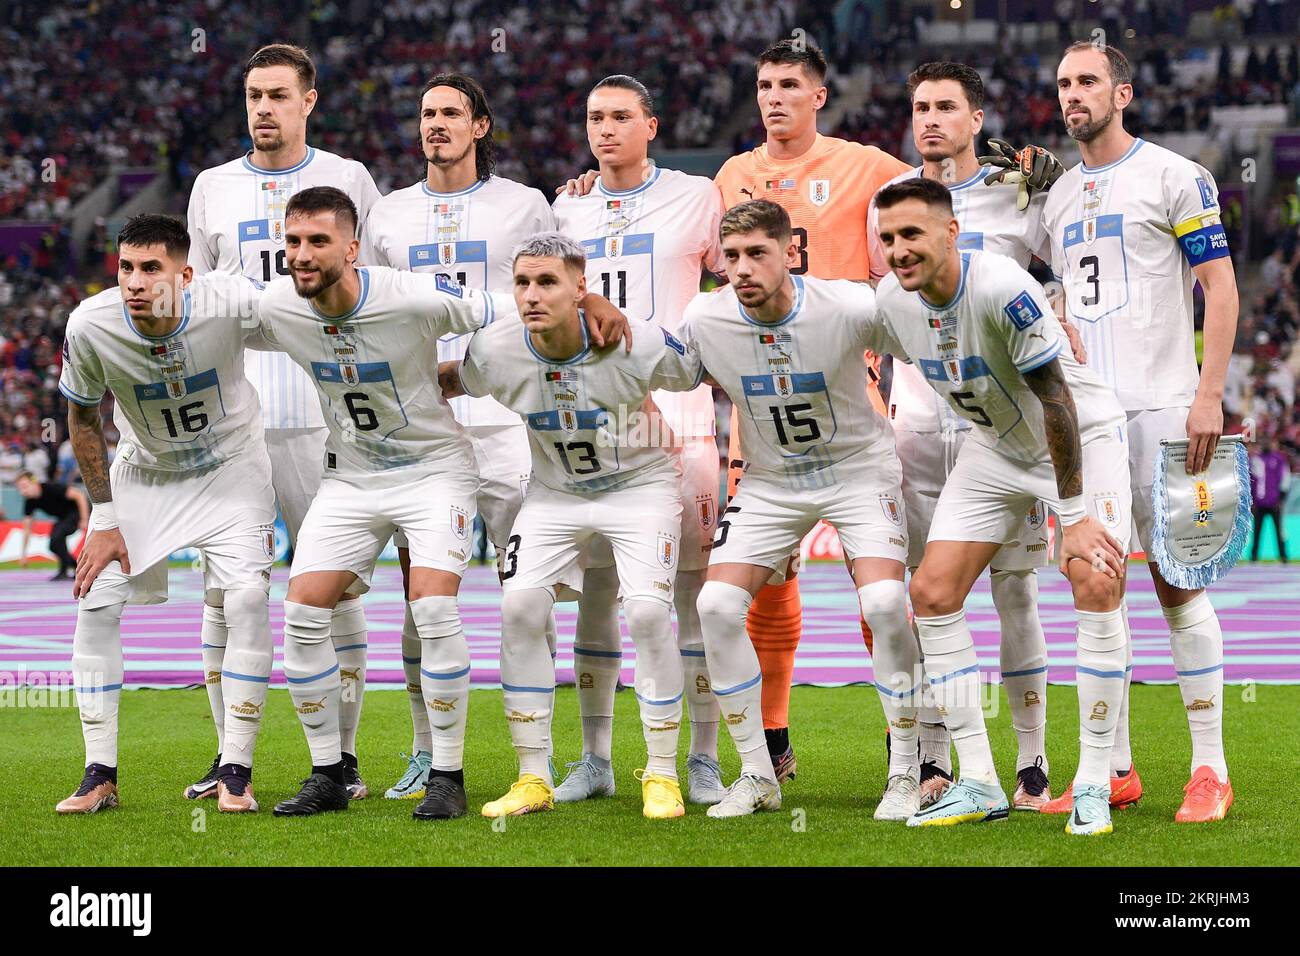 LUSAIL CITY, QATAR - NOVEMBER 28: Teamphoto of Uruguay with Sergio Rochet of Uruguay, Jose Gimenez of Uruguay, Diego Godin of Uruguay, Guillermo Varela of Uruguay, Mathias Oliveira of Uruguay, Sebastian Coates of Uruguay, Mathias Vecino of Uruguay, Rodrigo Bentancur of Uruguay, Federico Valverde of Uruguay, Darwin Nunez of Uruguay and Edinson Cavani of Uruguay prior to the Group H - FIFA World Cup Qatar 2022 match between Portugal and Uruguay at the Lusail Stadium on November 28, 2022 in Lusail City, Qatar (Photo by Pablo Morano/BSR Agency) Stock Photo